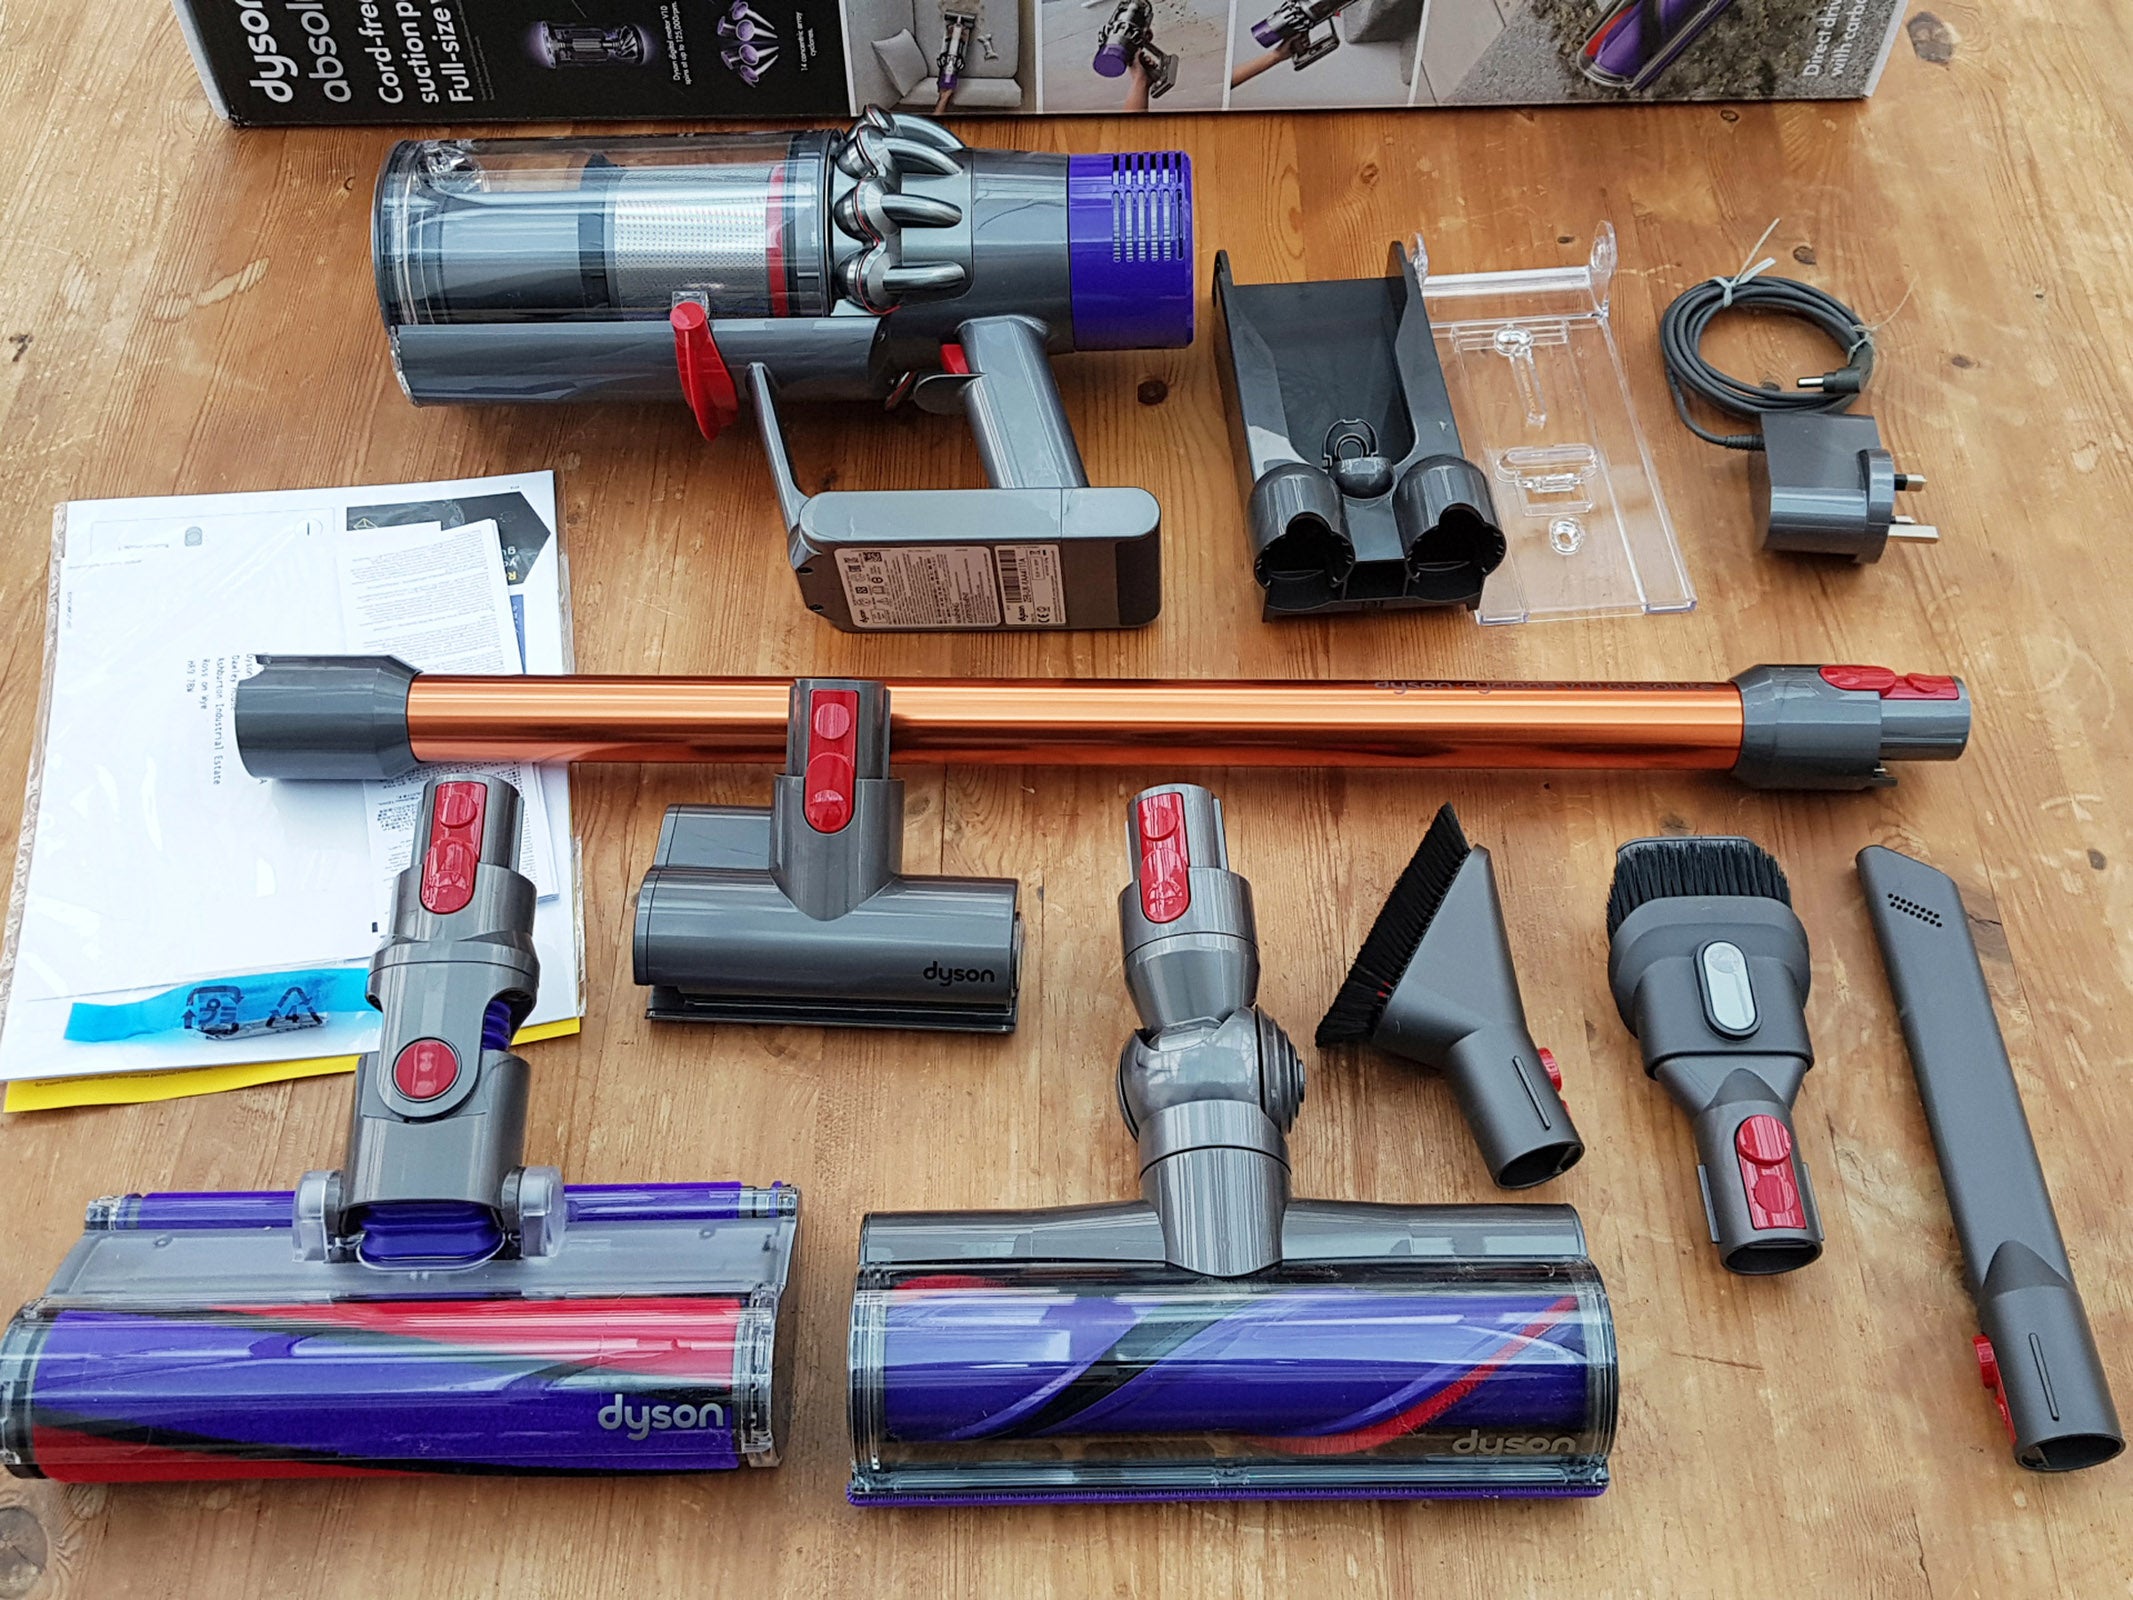 Dyson Cyclone V10 Absolute vacuum and accessories displayed.